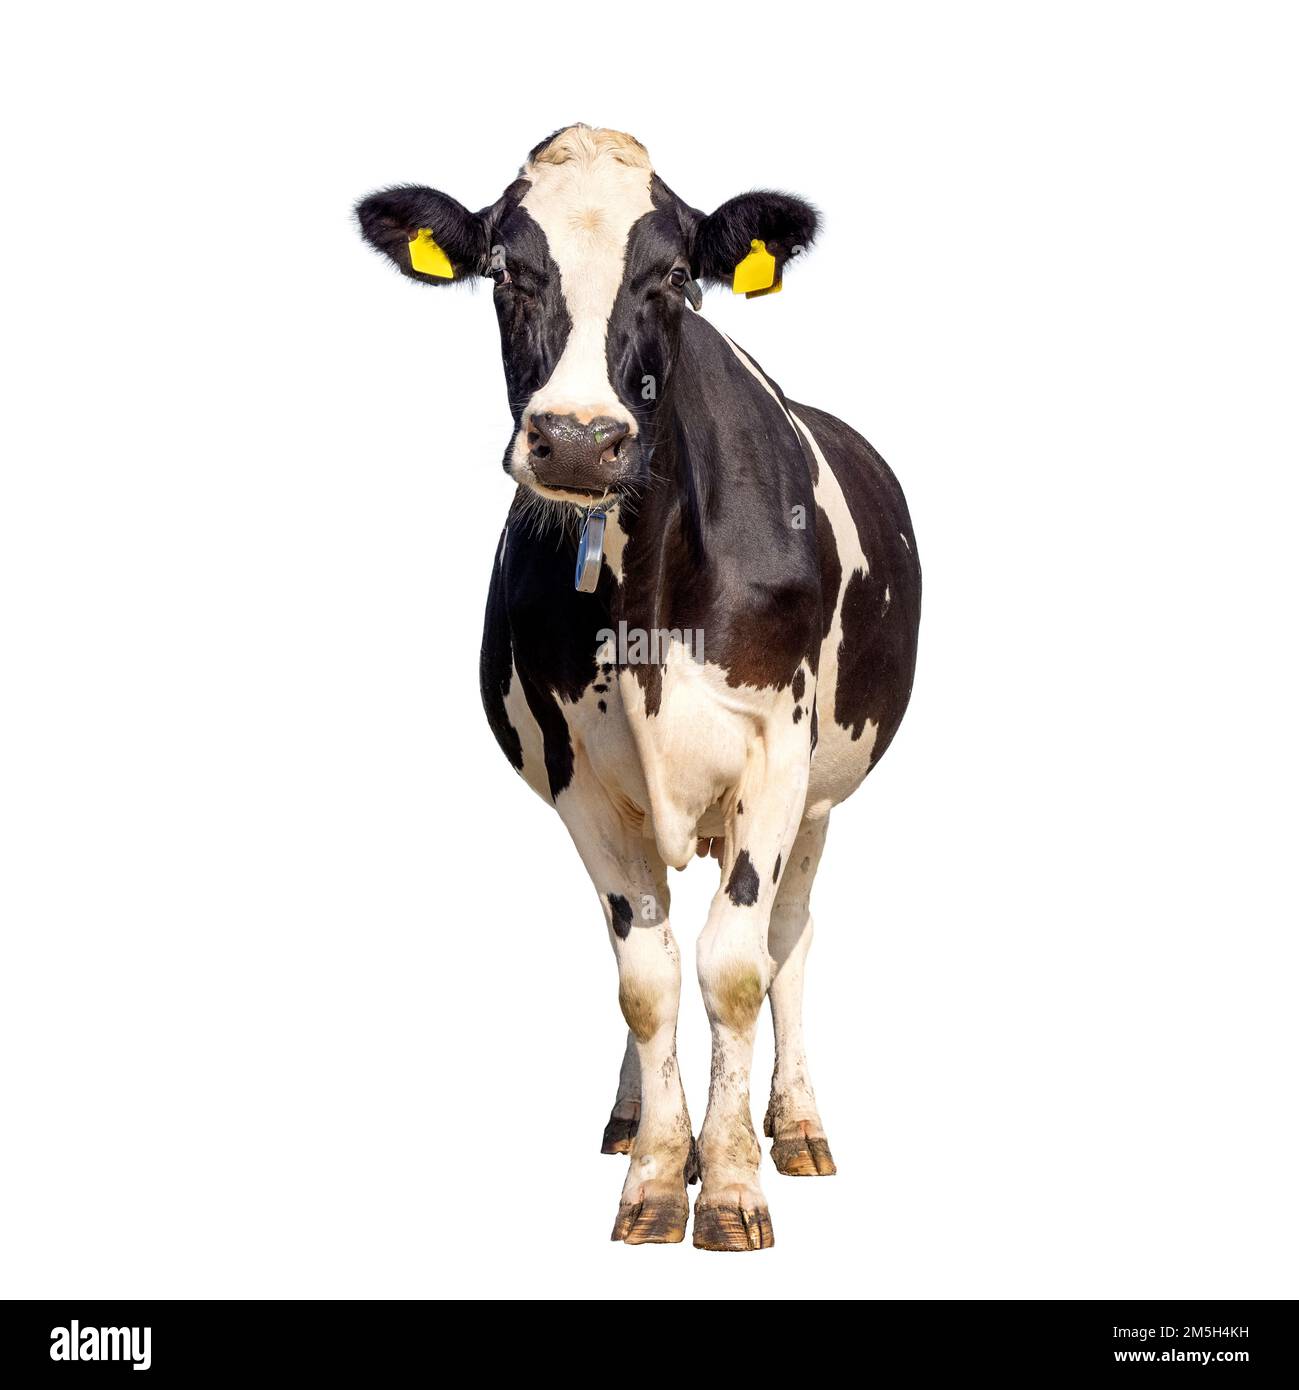 Cow isolated on white background, standing upright black and white, full length and front view and copy space Stock Photo